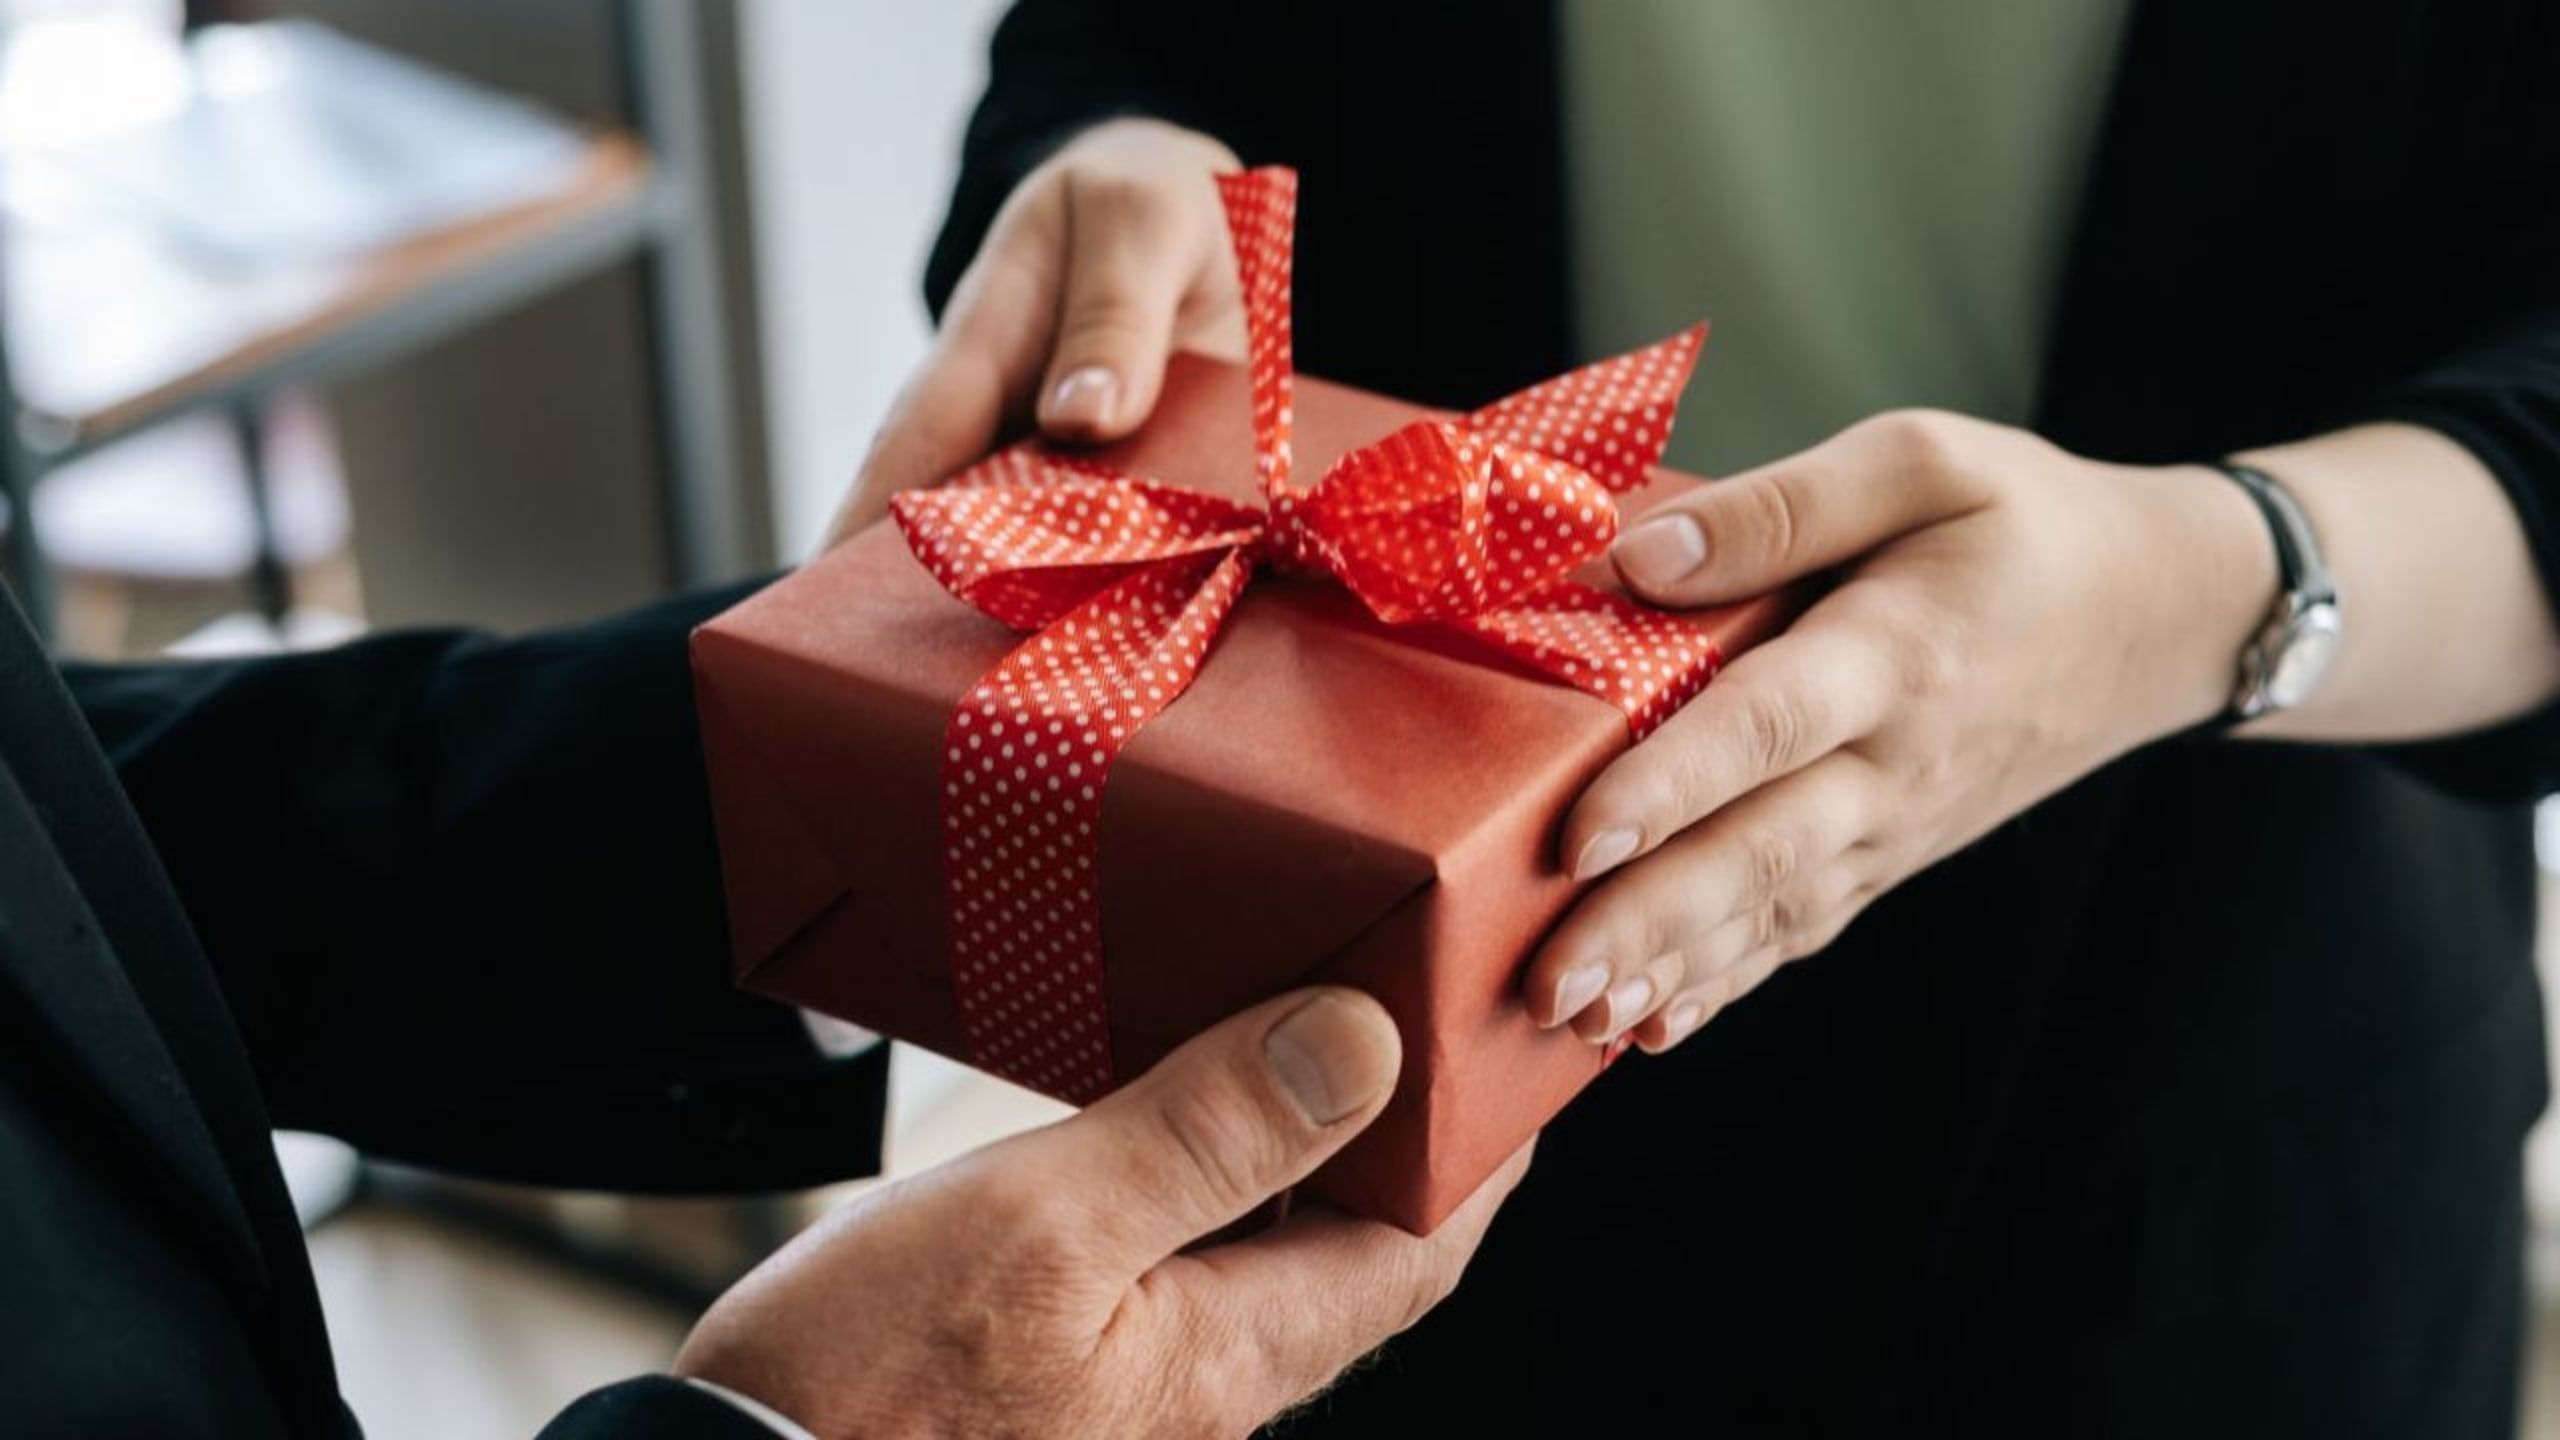 gifts for employees